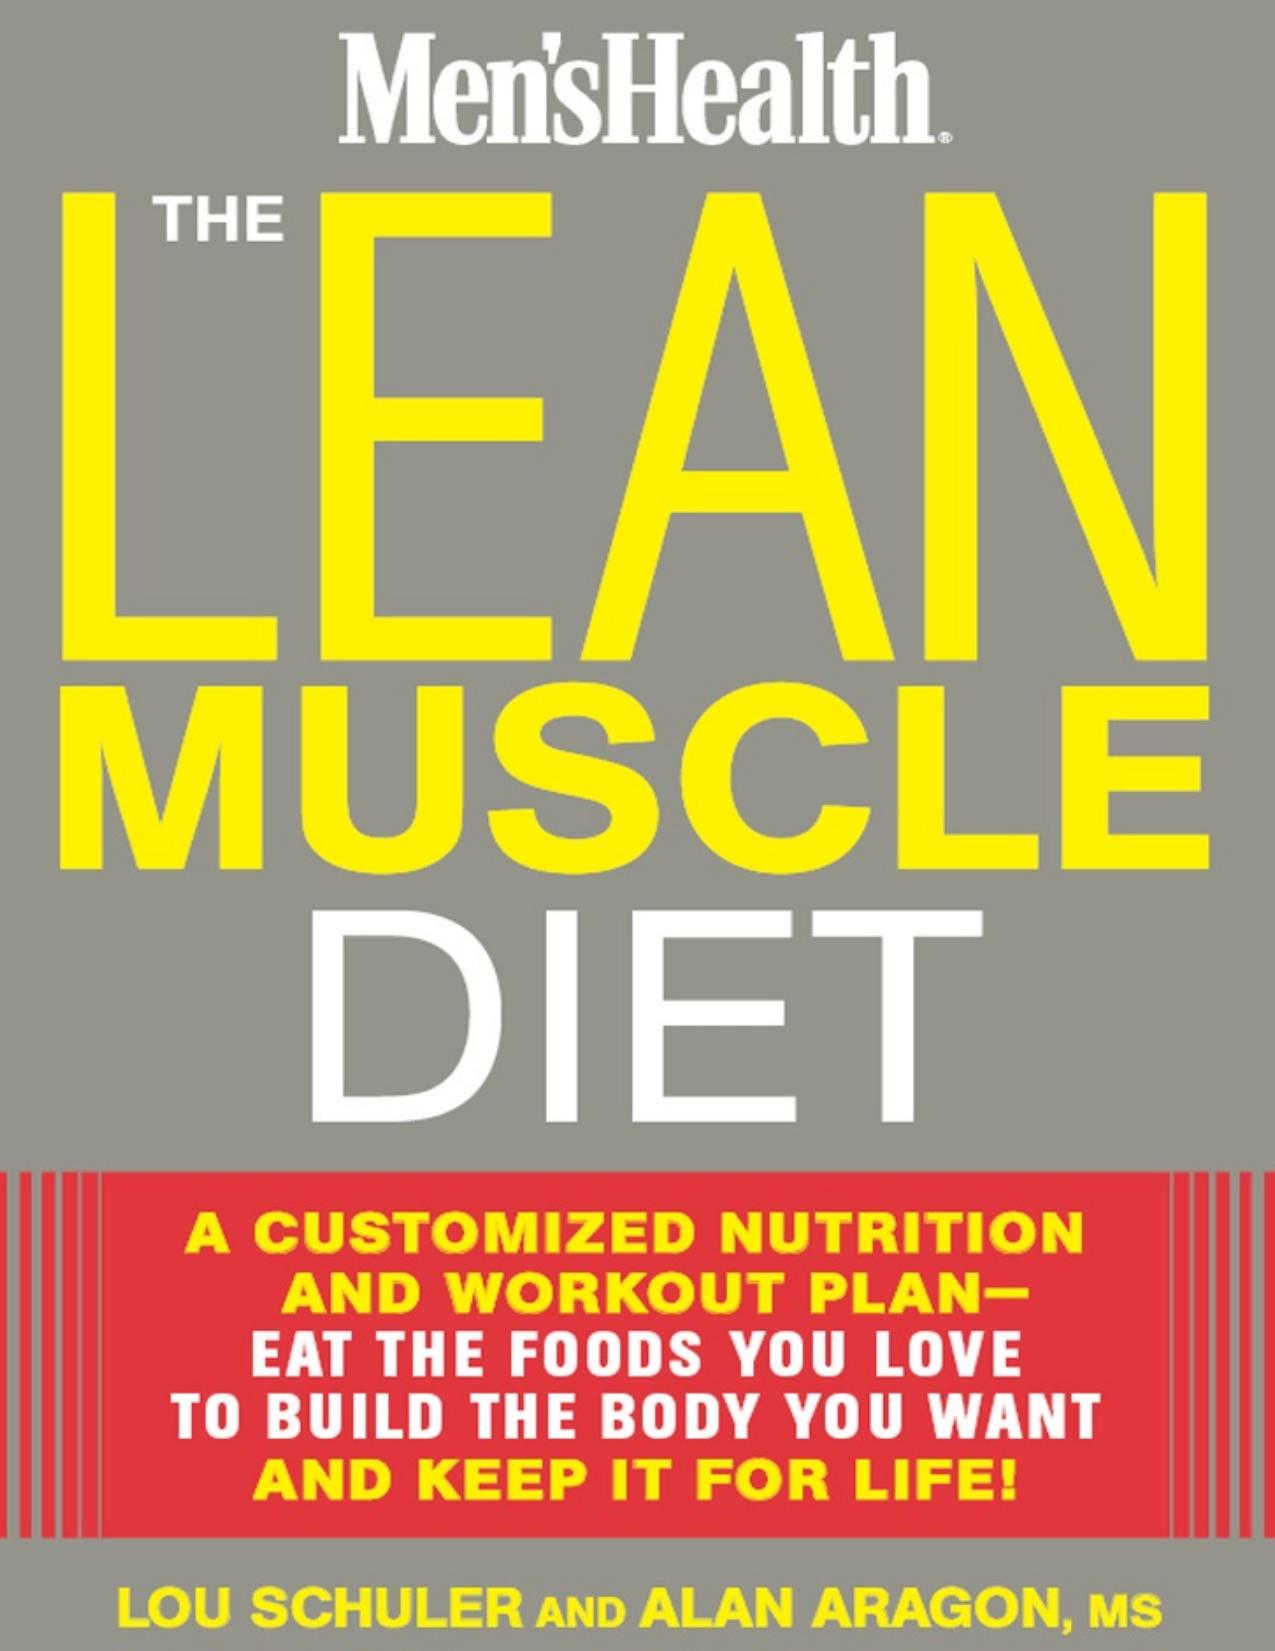 The Lean Muscle Diet by Lou Schuler